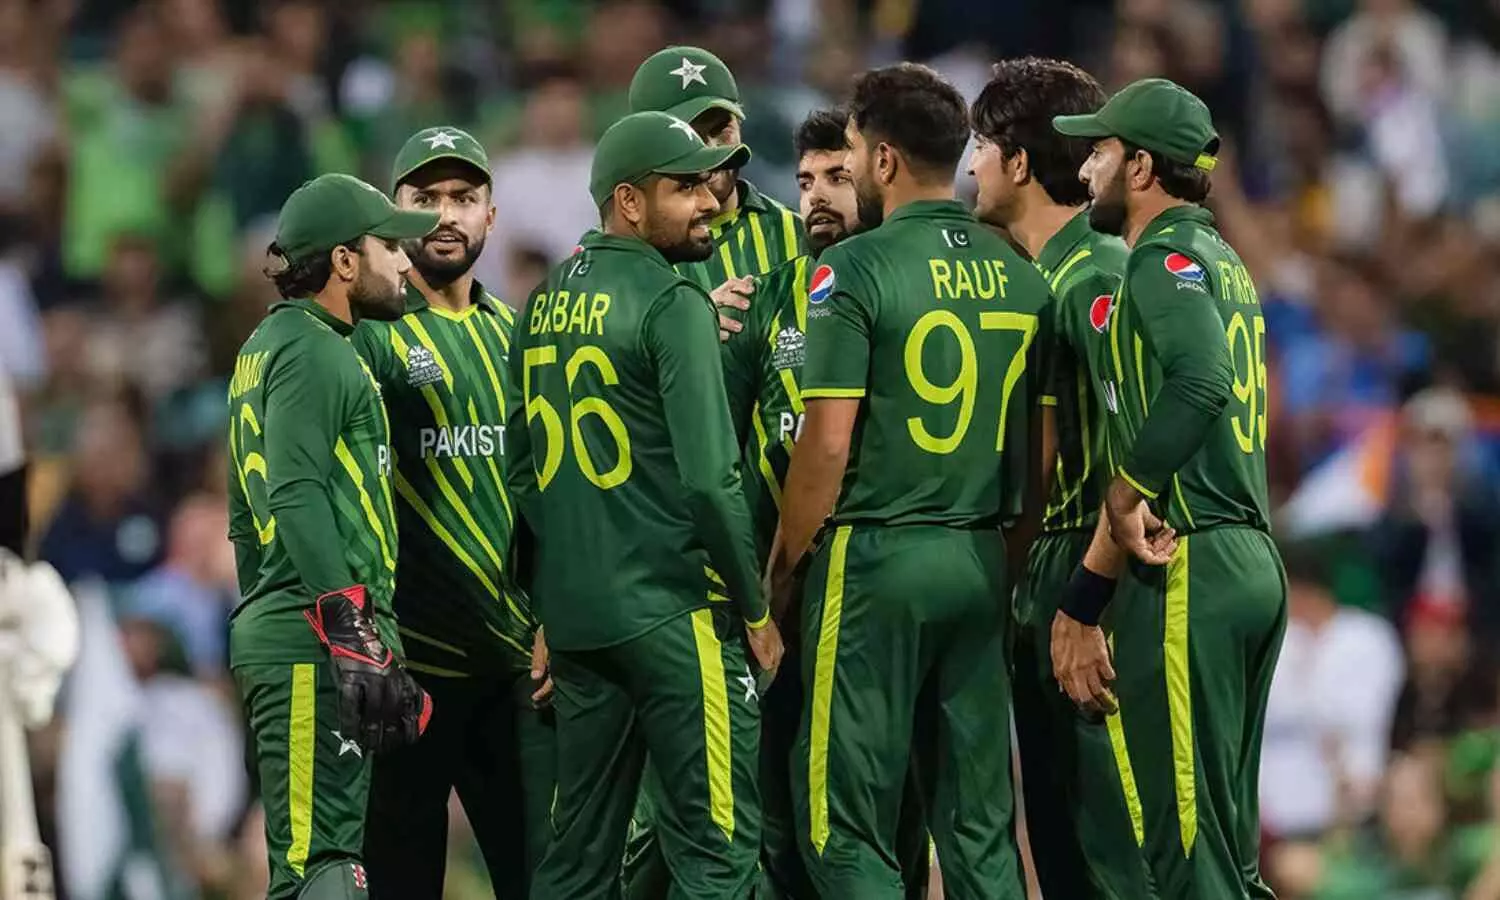 Pakistan cricket team selectors sacked, PCB meets former cricketers to discuss way forward after poor showing in ICC T20 World Cup